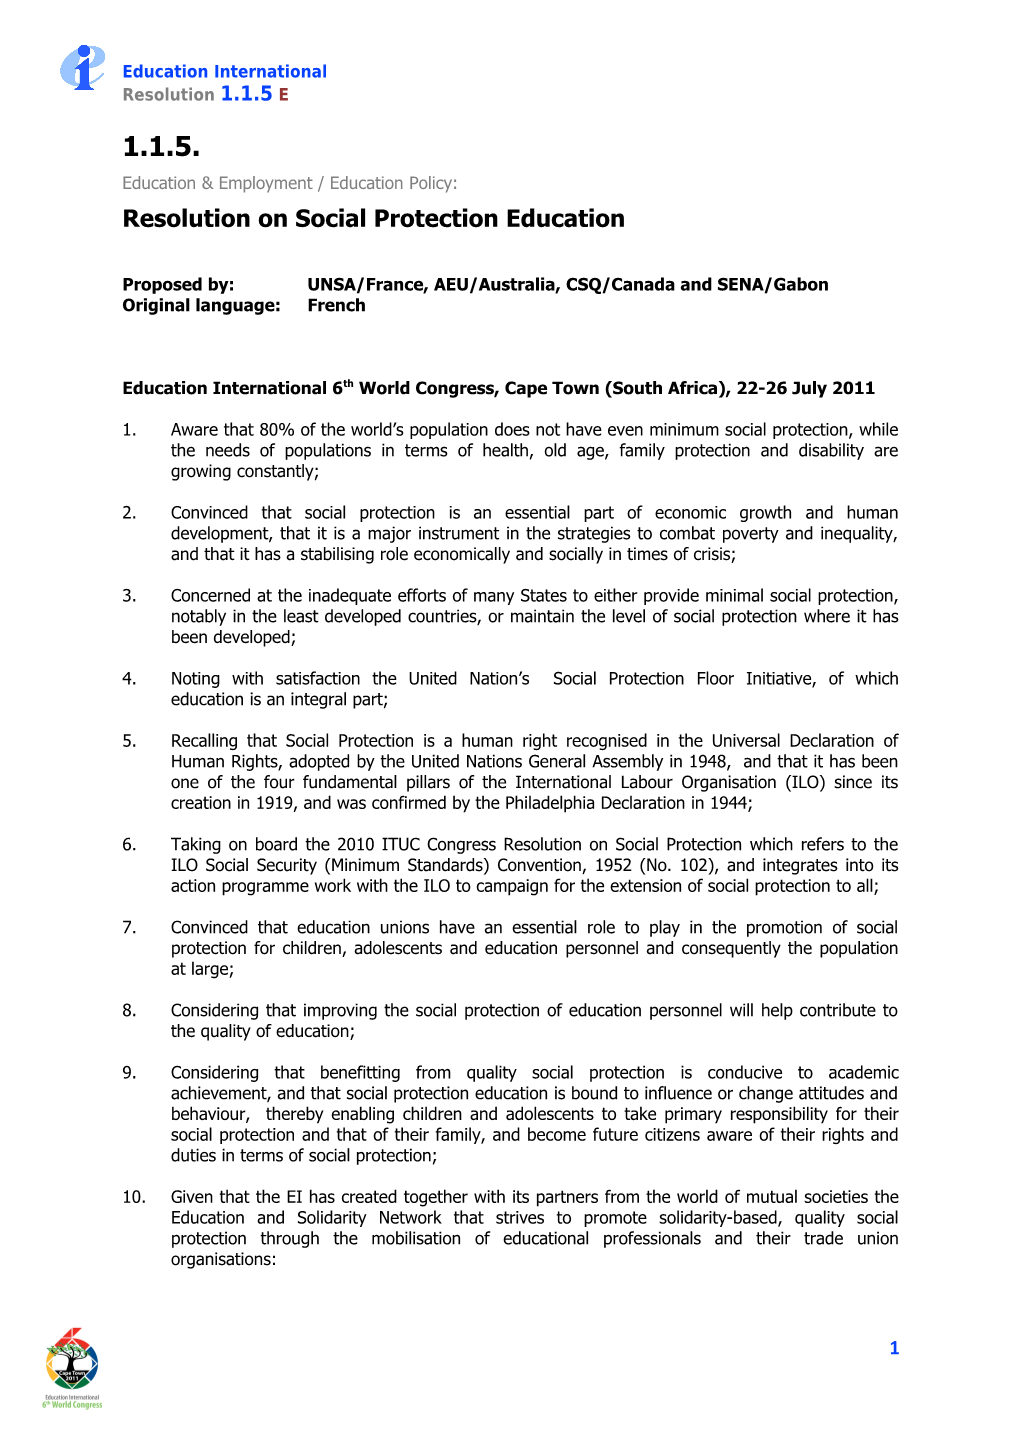 Resolution on Social Protection Education